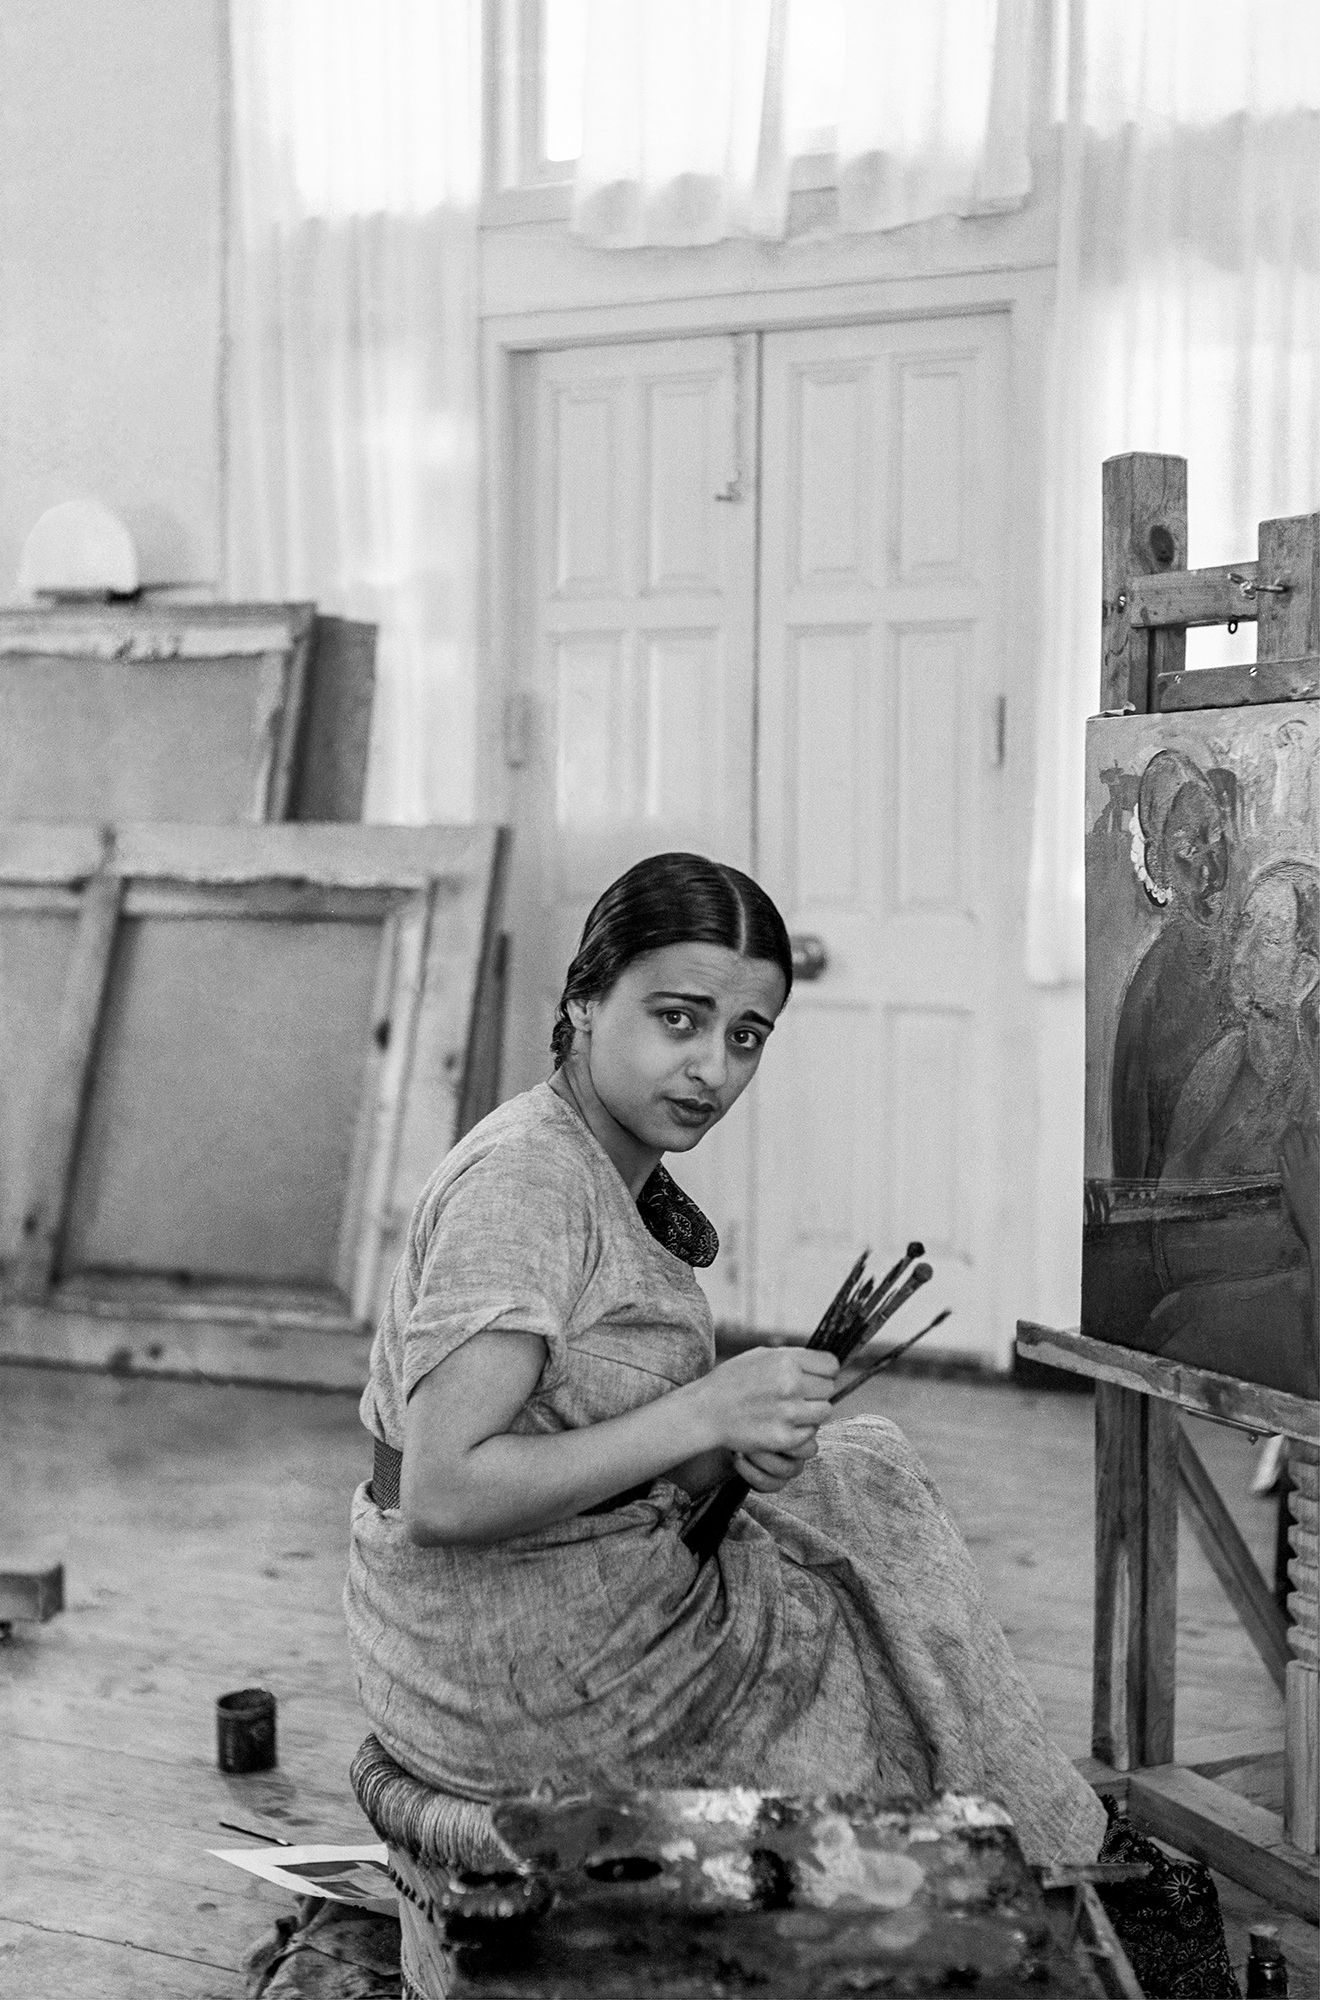 Umrao Singh Sher-Gil, Amrita at her easel Simla, India (1937). Silver gelatin print with selenium toning. Courtesy The Estate of Umrao Singh Sher-Gil and PHOTOINK